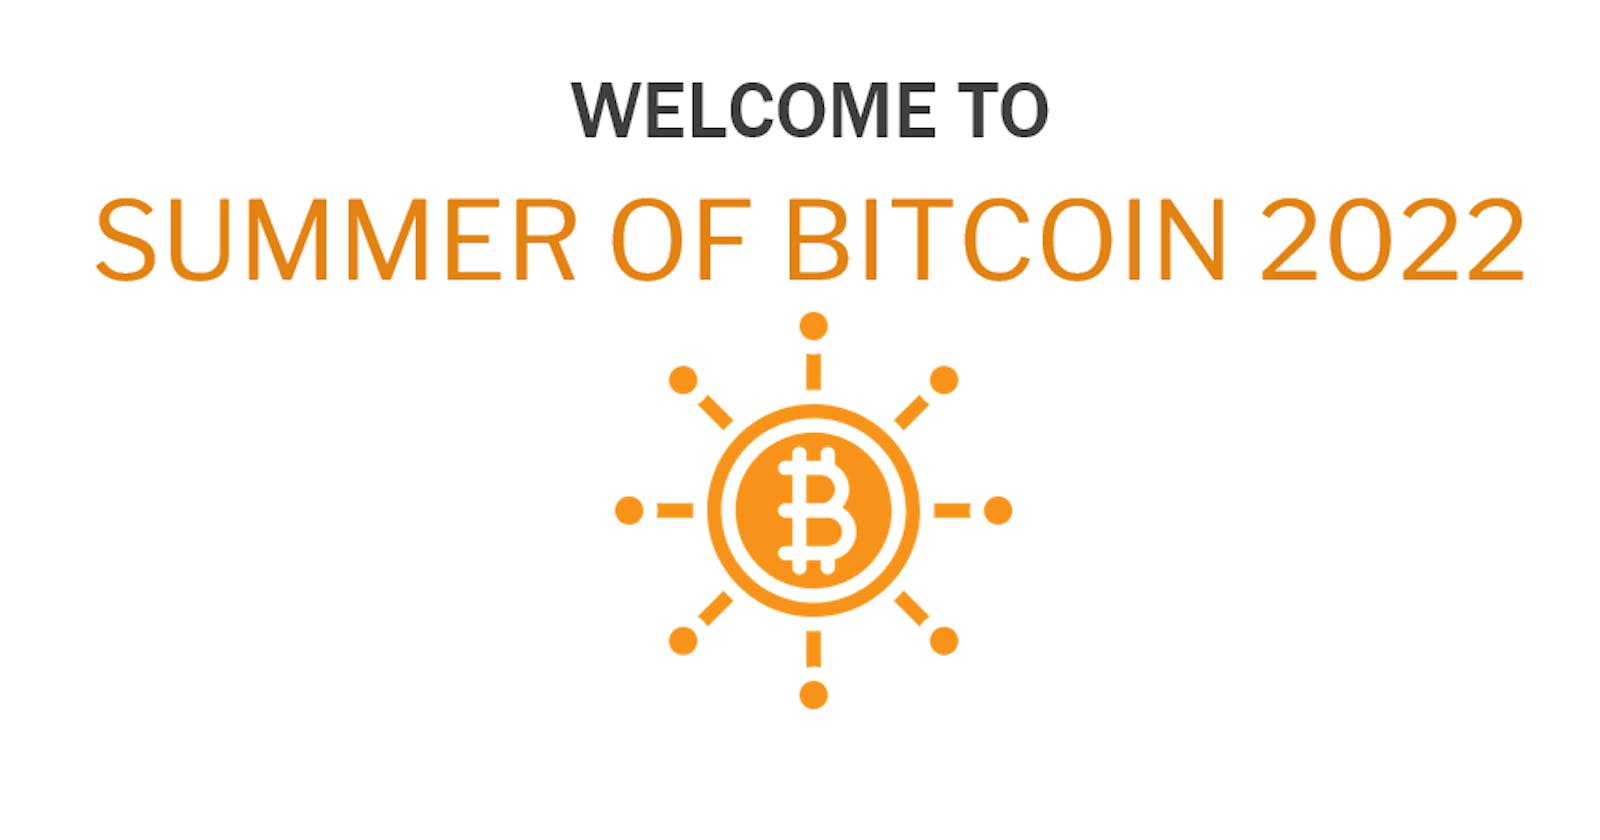 A Glimpse Inside Summer of Bitcoin